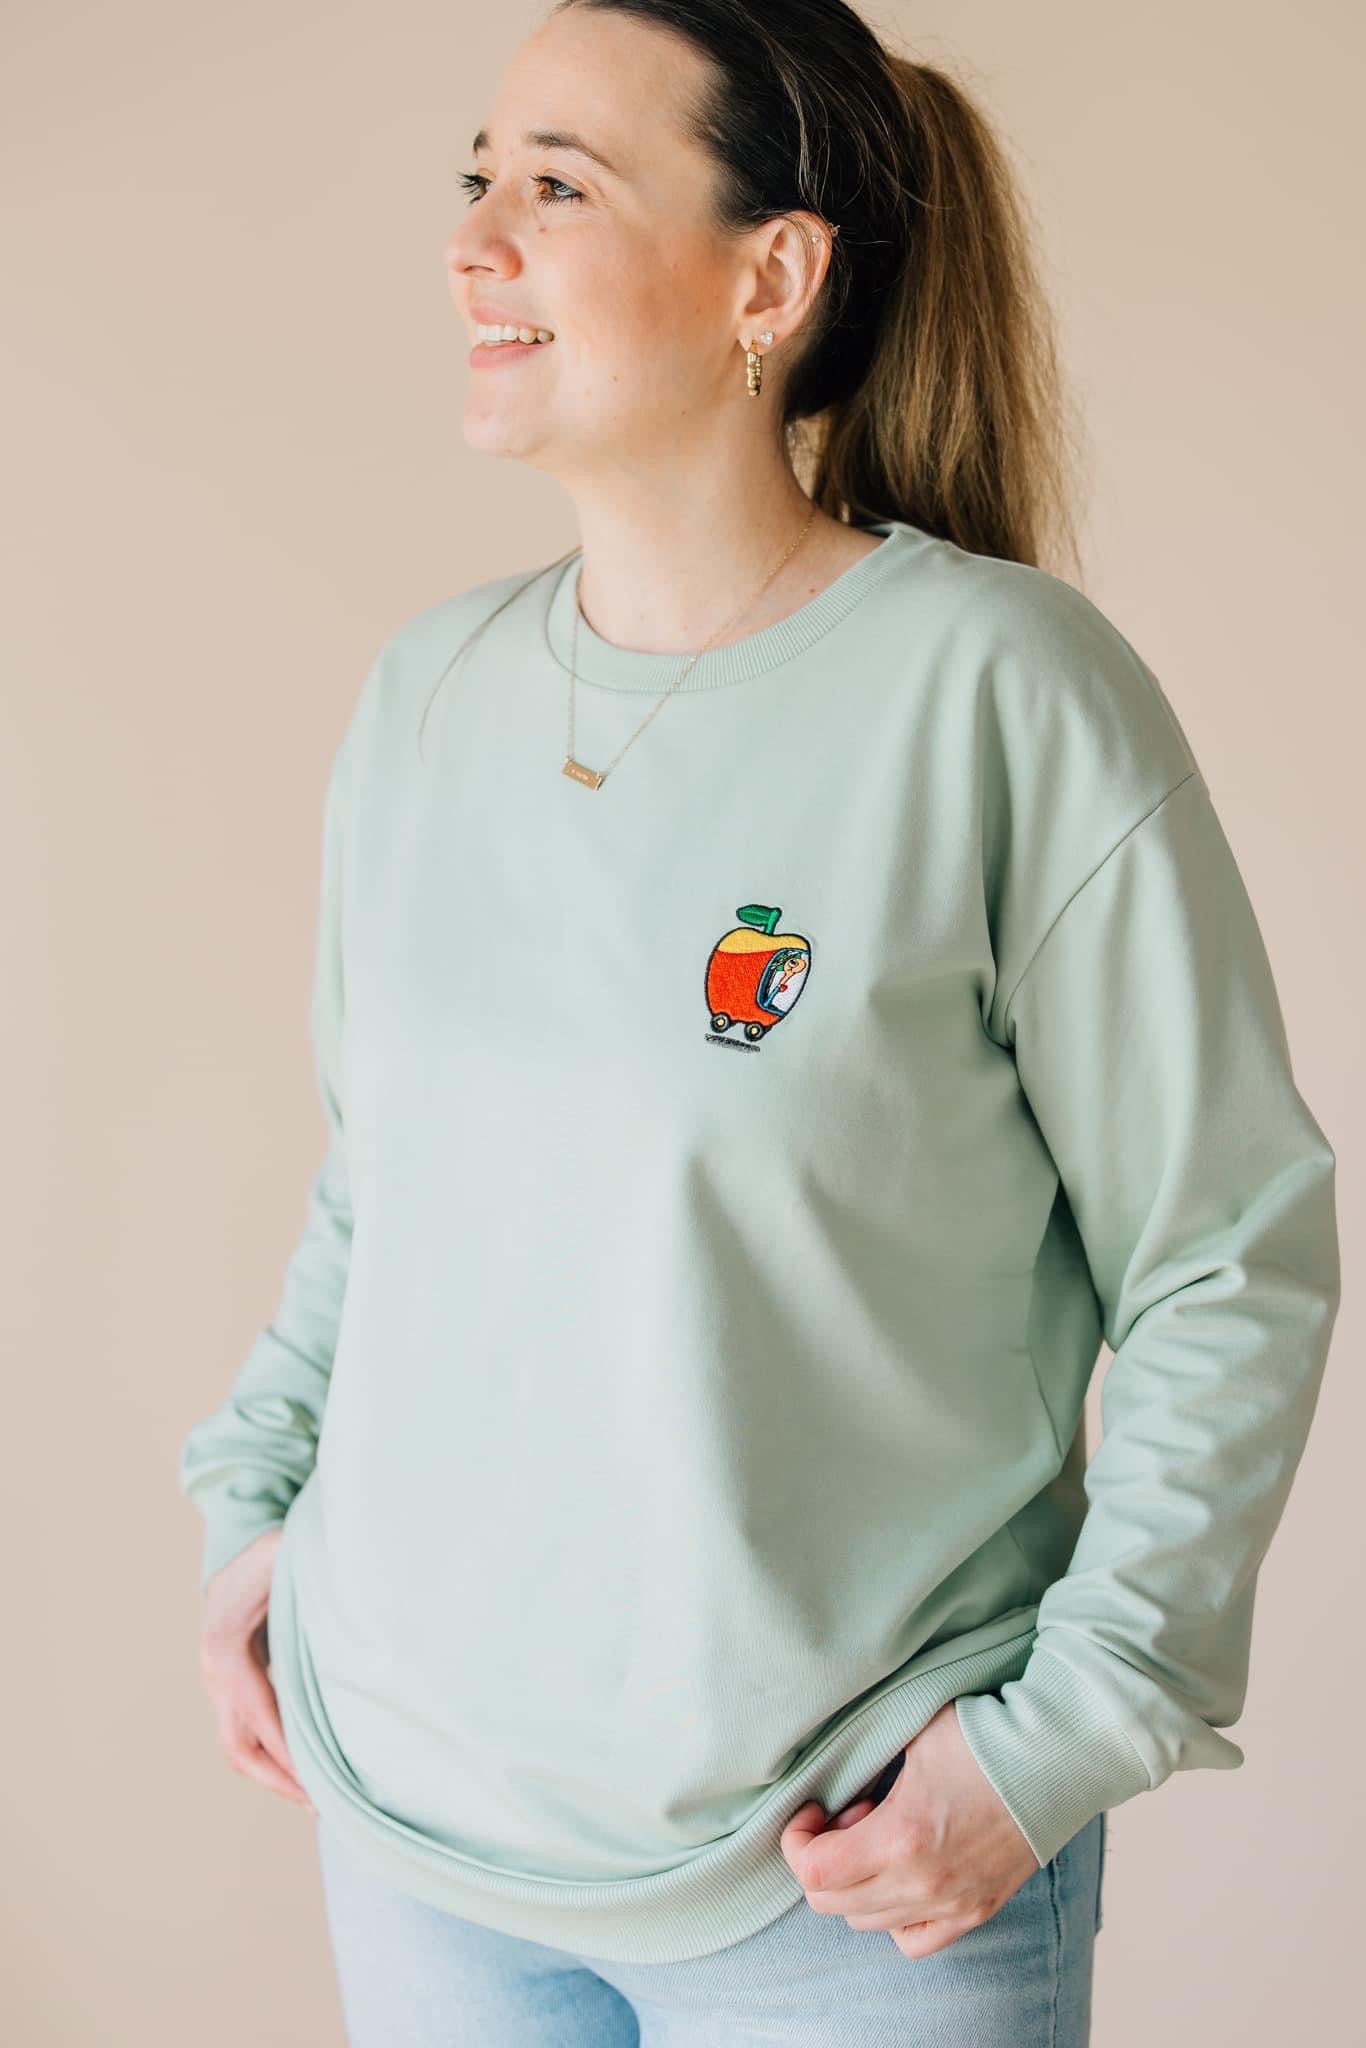 Richard Scarry's Busyworld™ Embroidered Apple Solid Adult Crewneck